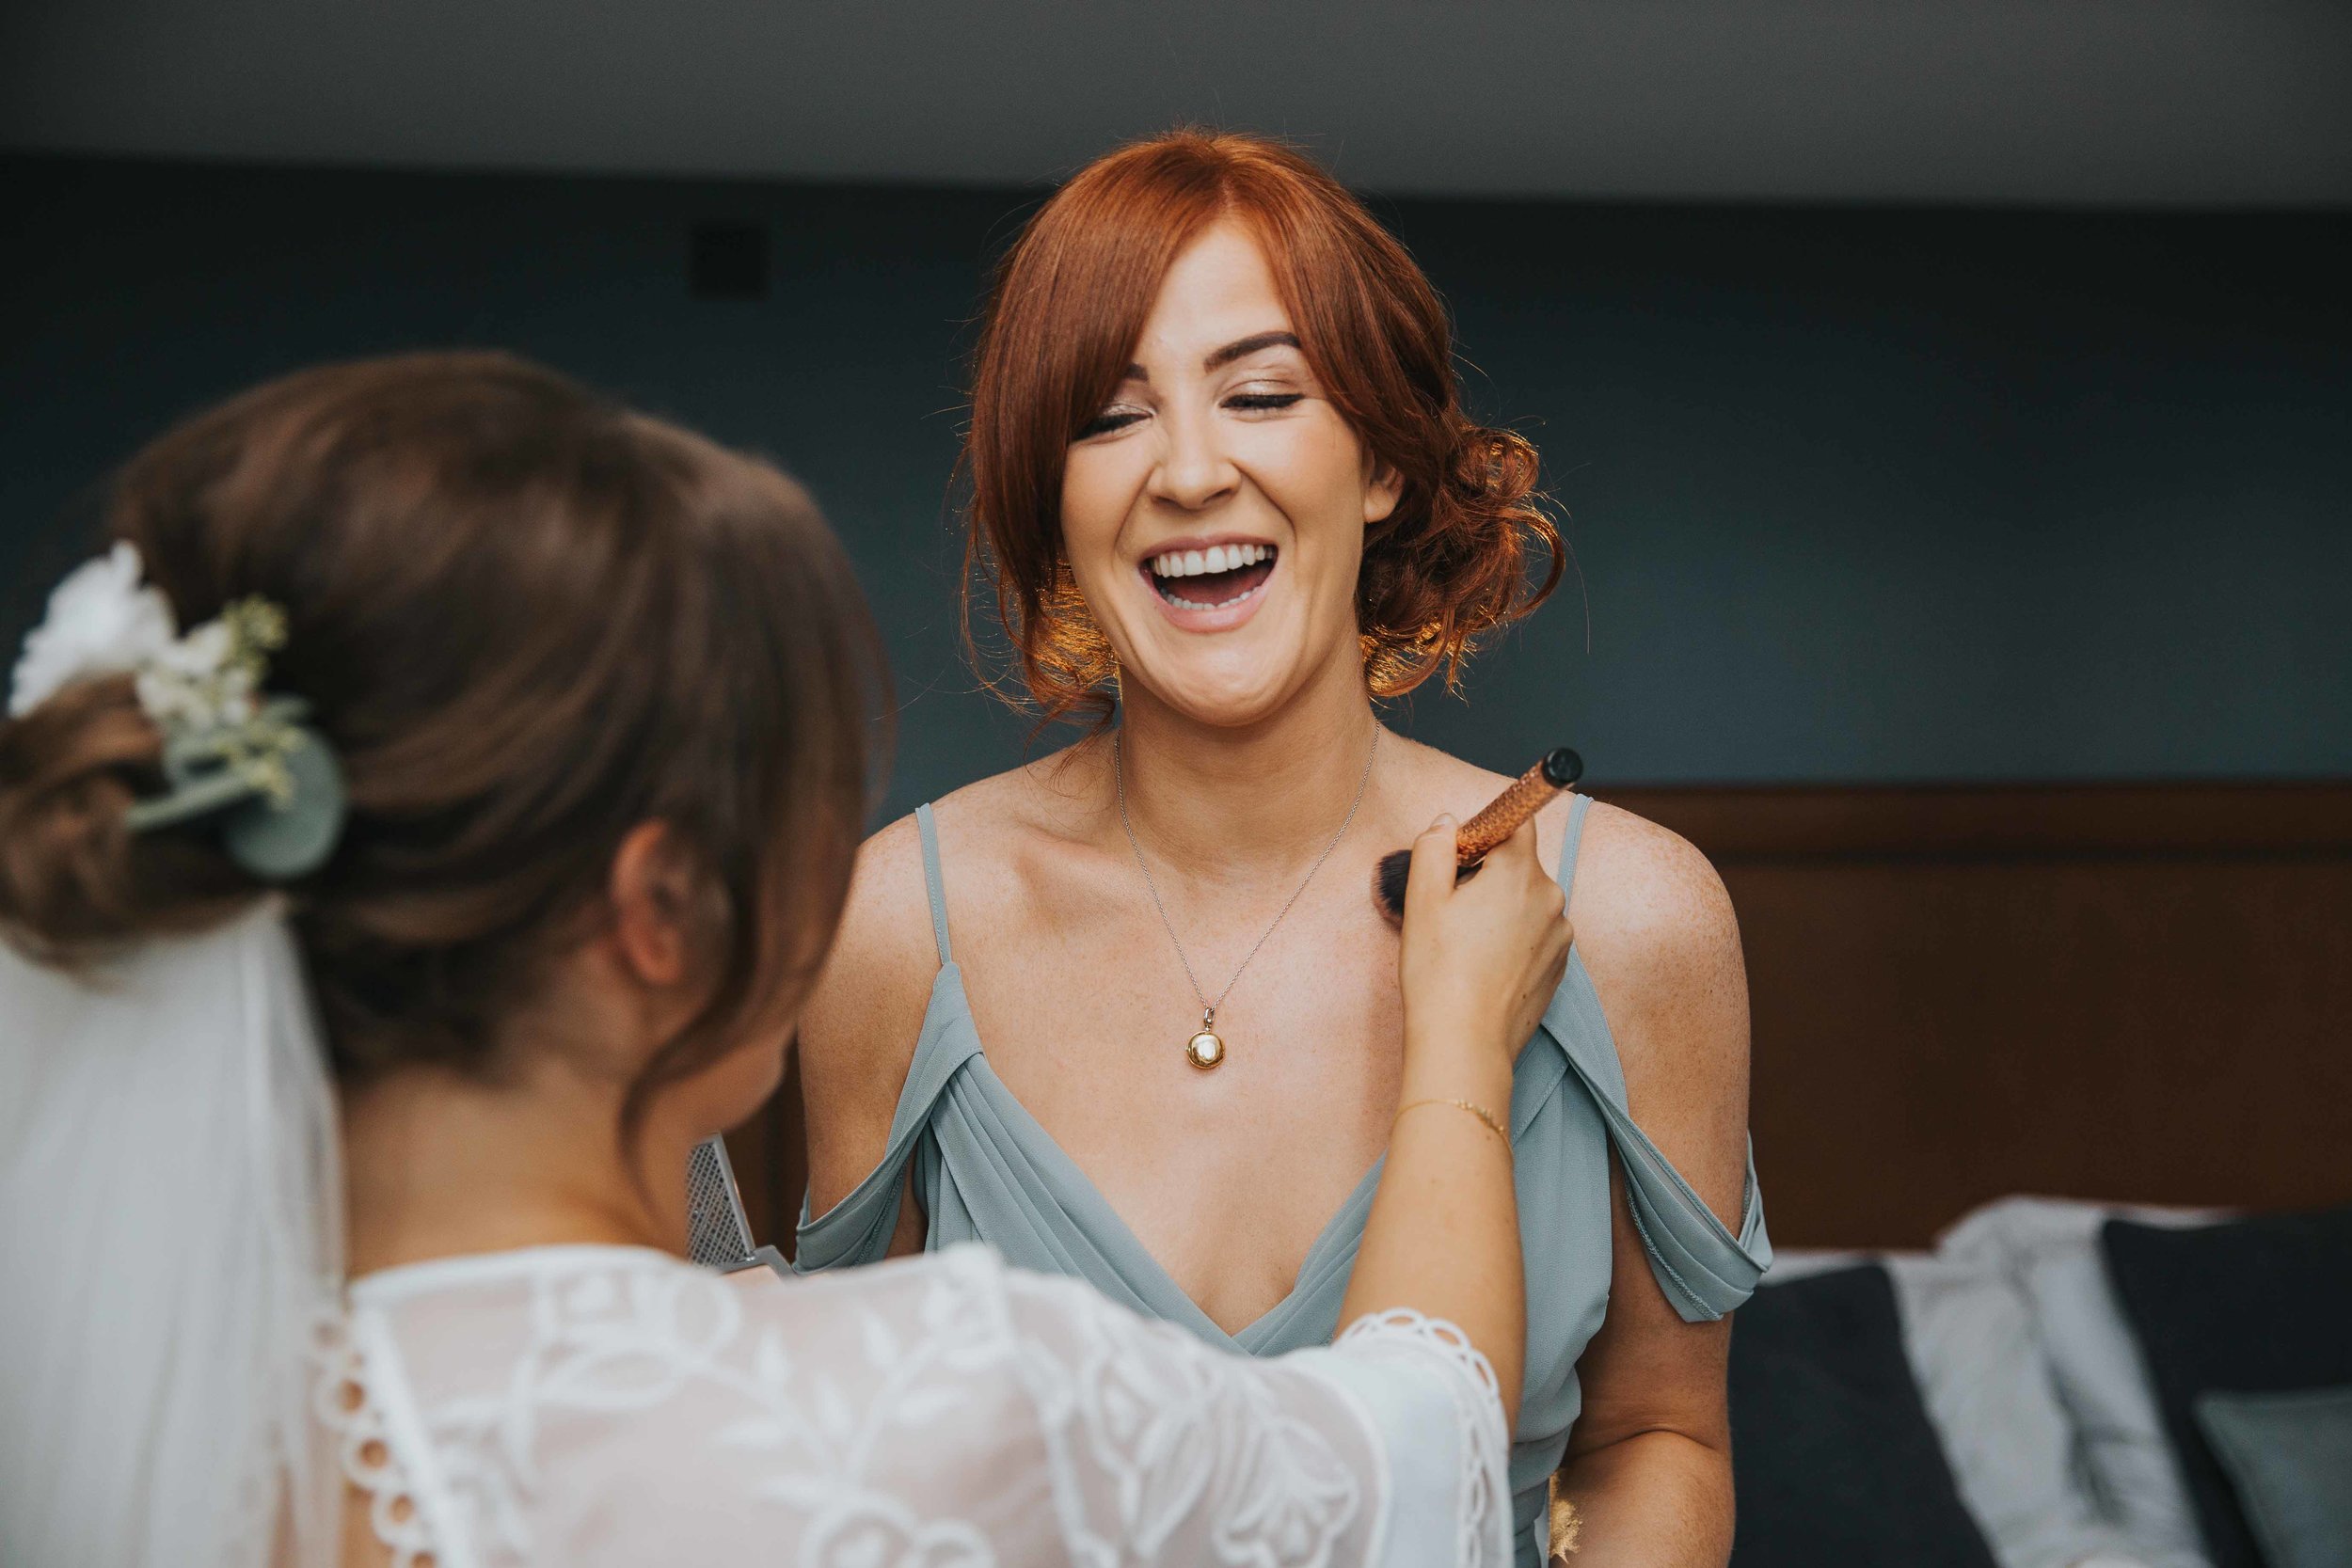 bridesmaids laughing hotel wedding venue Manchester